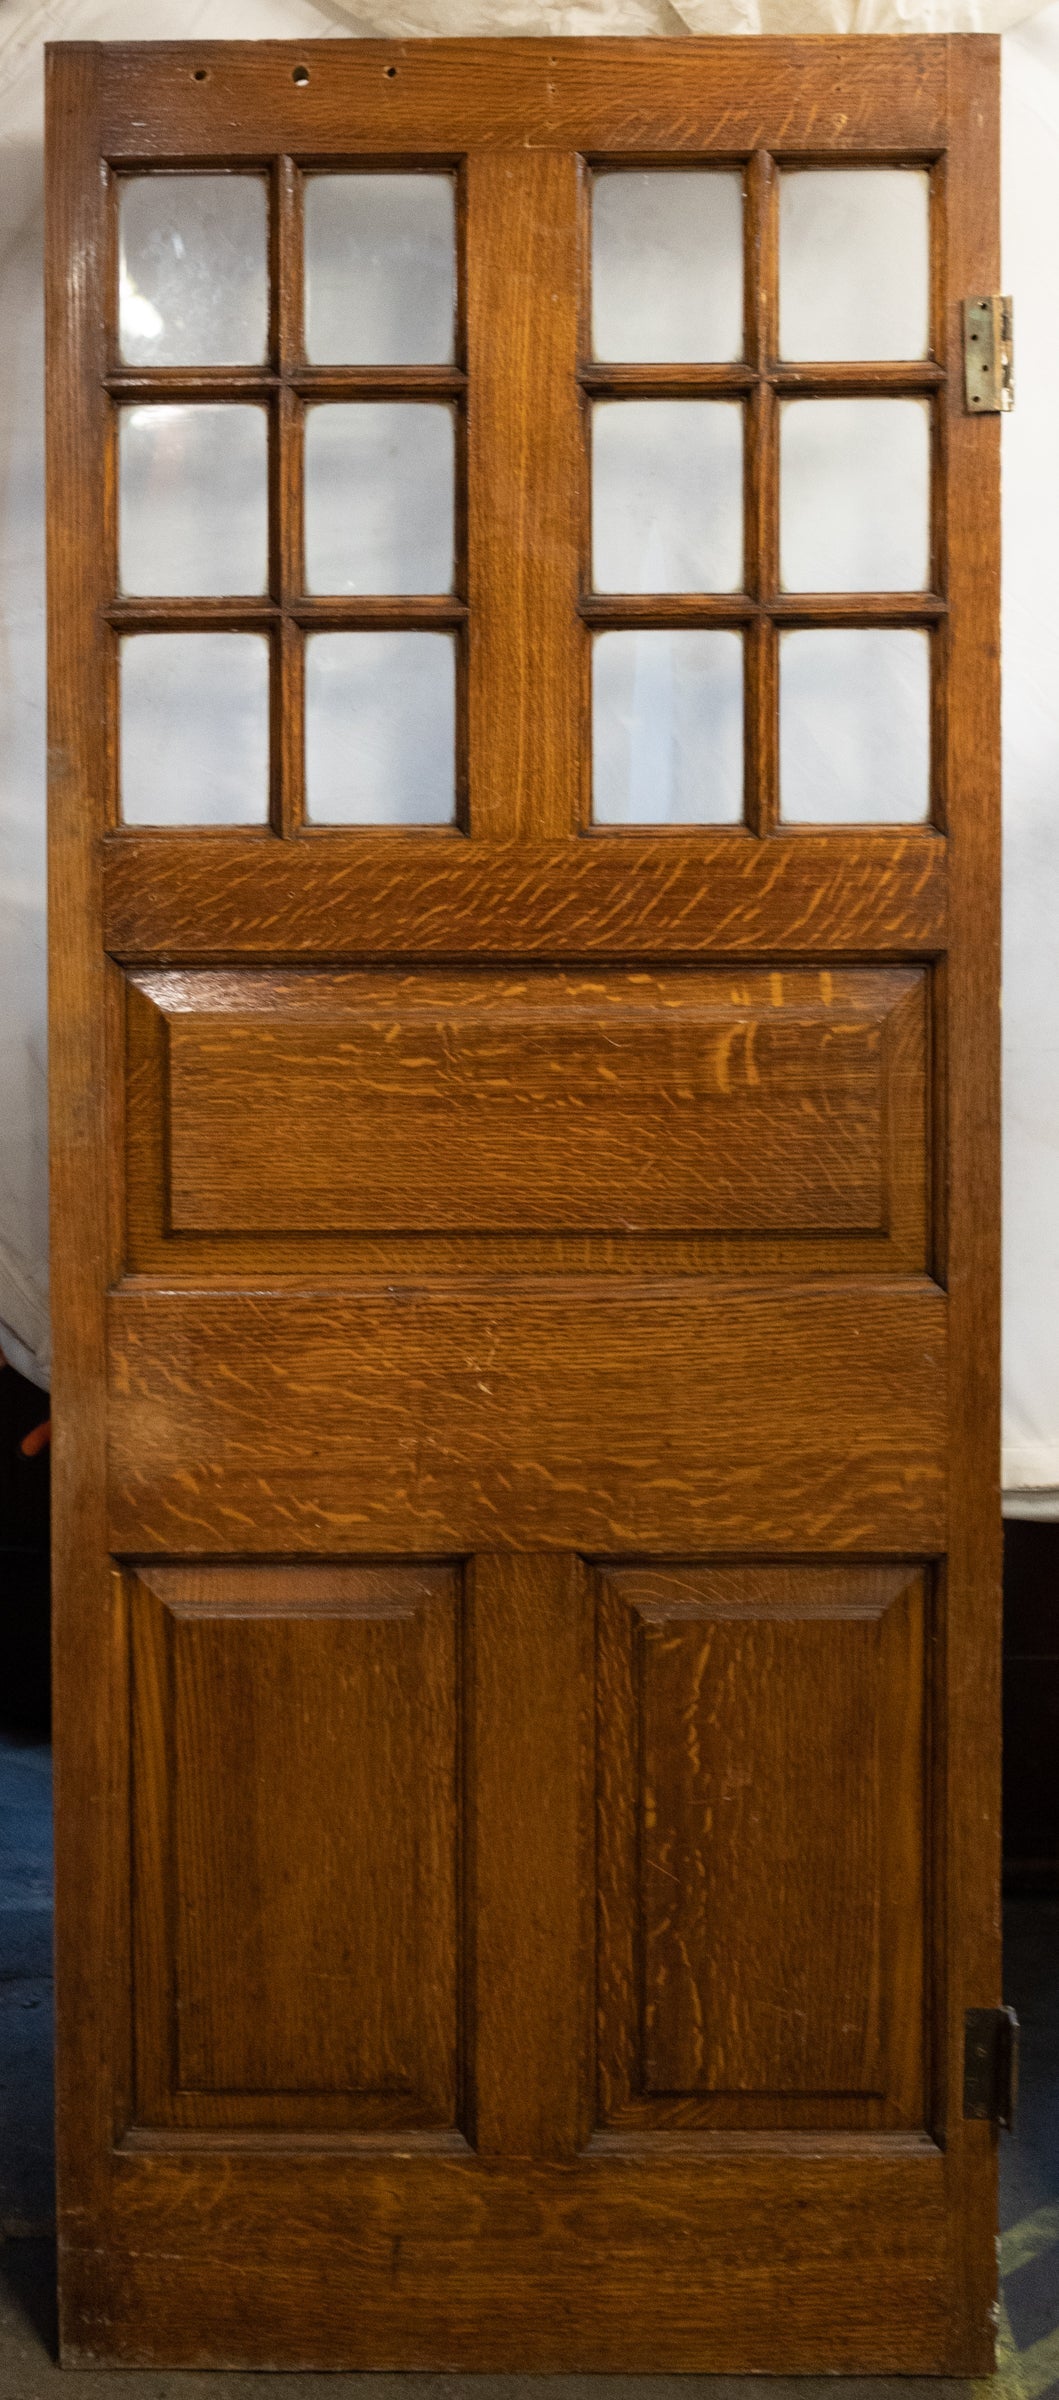 Glazed Oak Doors Reclaimed from Mercers&#39; Hall London | The Architectural Forum